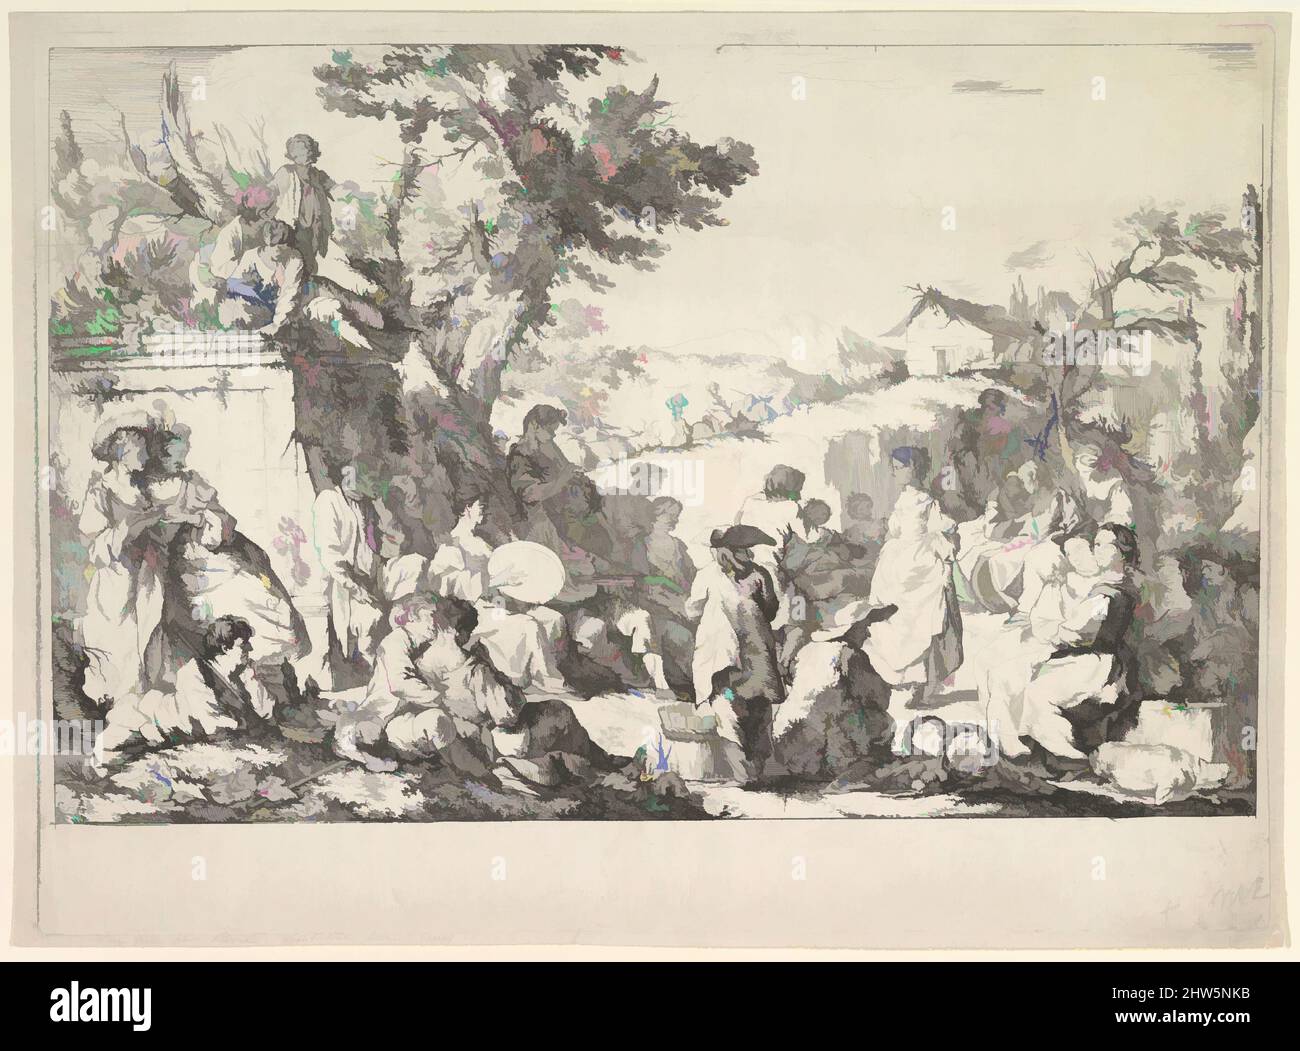 Art inspired by The Village Festival (Fête de village dans la campagne romaine), ca. 1735–40, Etching; proof state, sheet: 12 9/16 x 16 15/16 in. (31.9 x 43.1 cm), Prints, Jean-Baptiste Marie Pierre (French, Paris 1714–1789 Paris, Classic works modernized by Artotop with a splash of modernity. Shapes, color and value, eye-catching visual impact on art. Emotions through freedom of artworks in a contemporary way. A timeless message pursuing a wildly creative new direction. Artists turning to the digital medium and creating the Artotop NFT Stock Photo